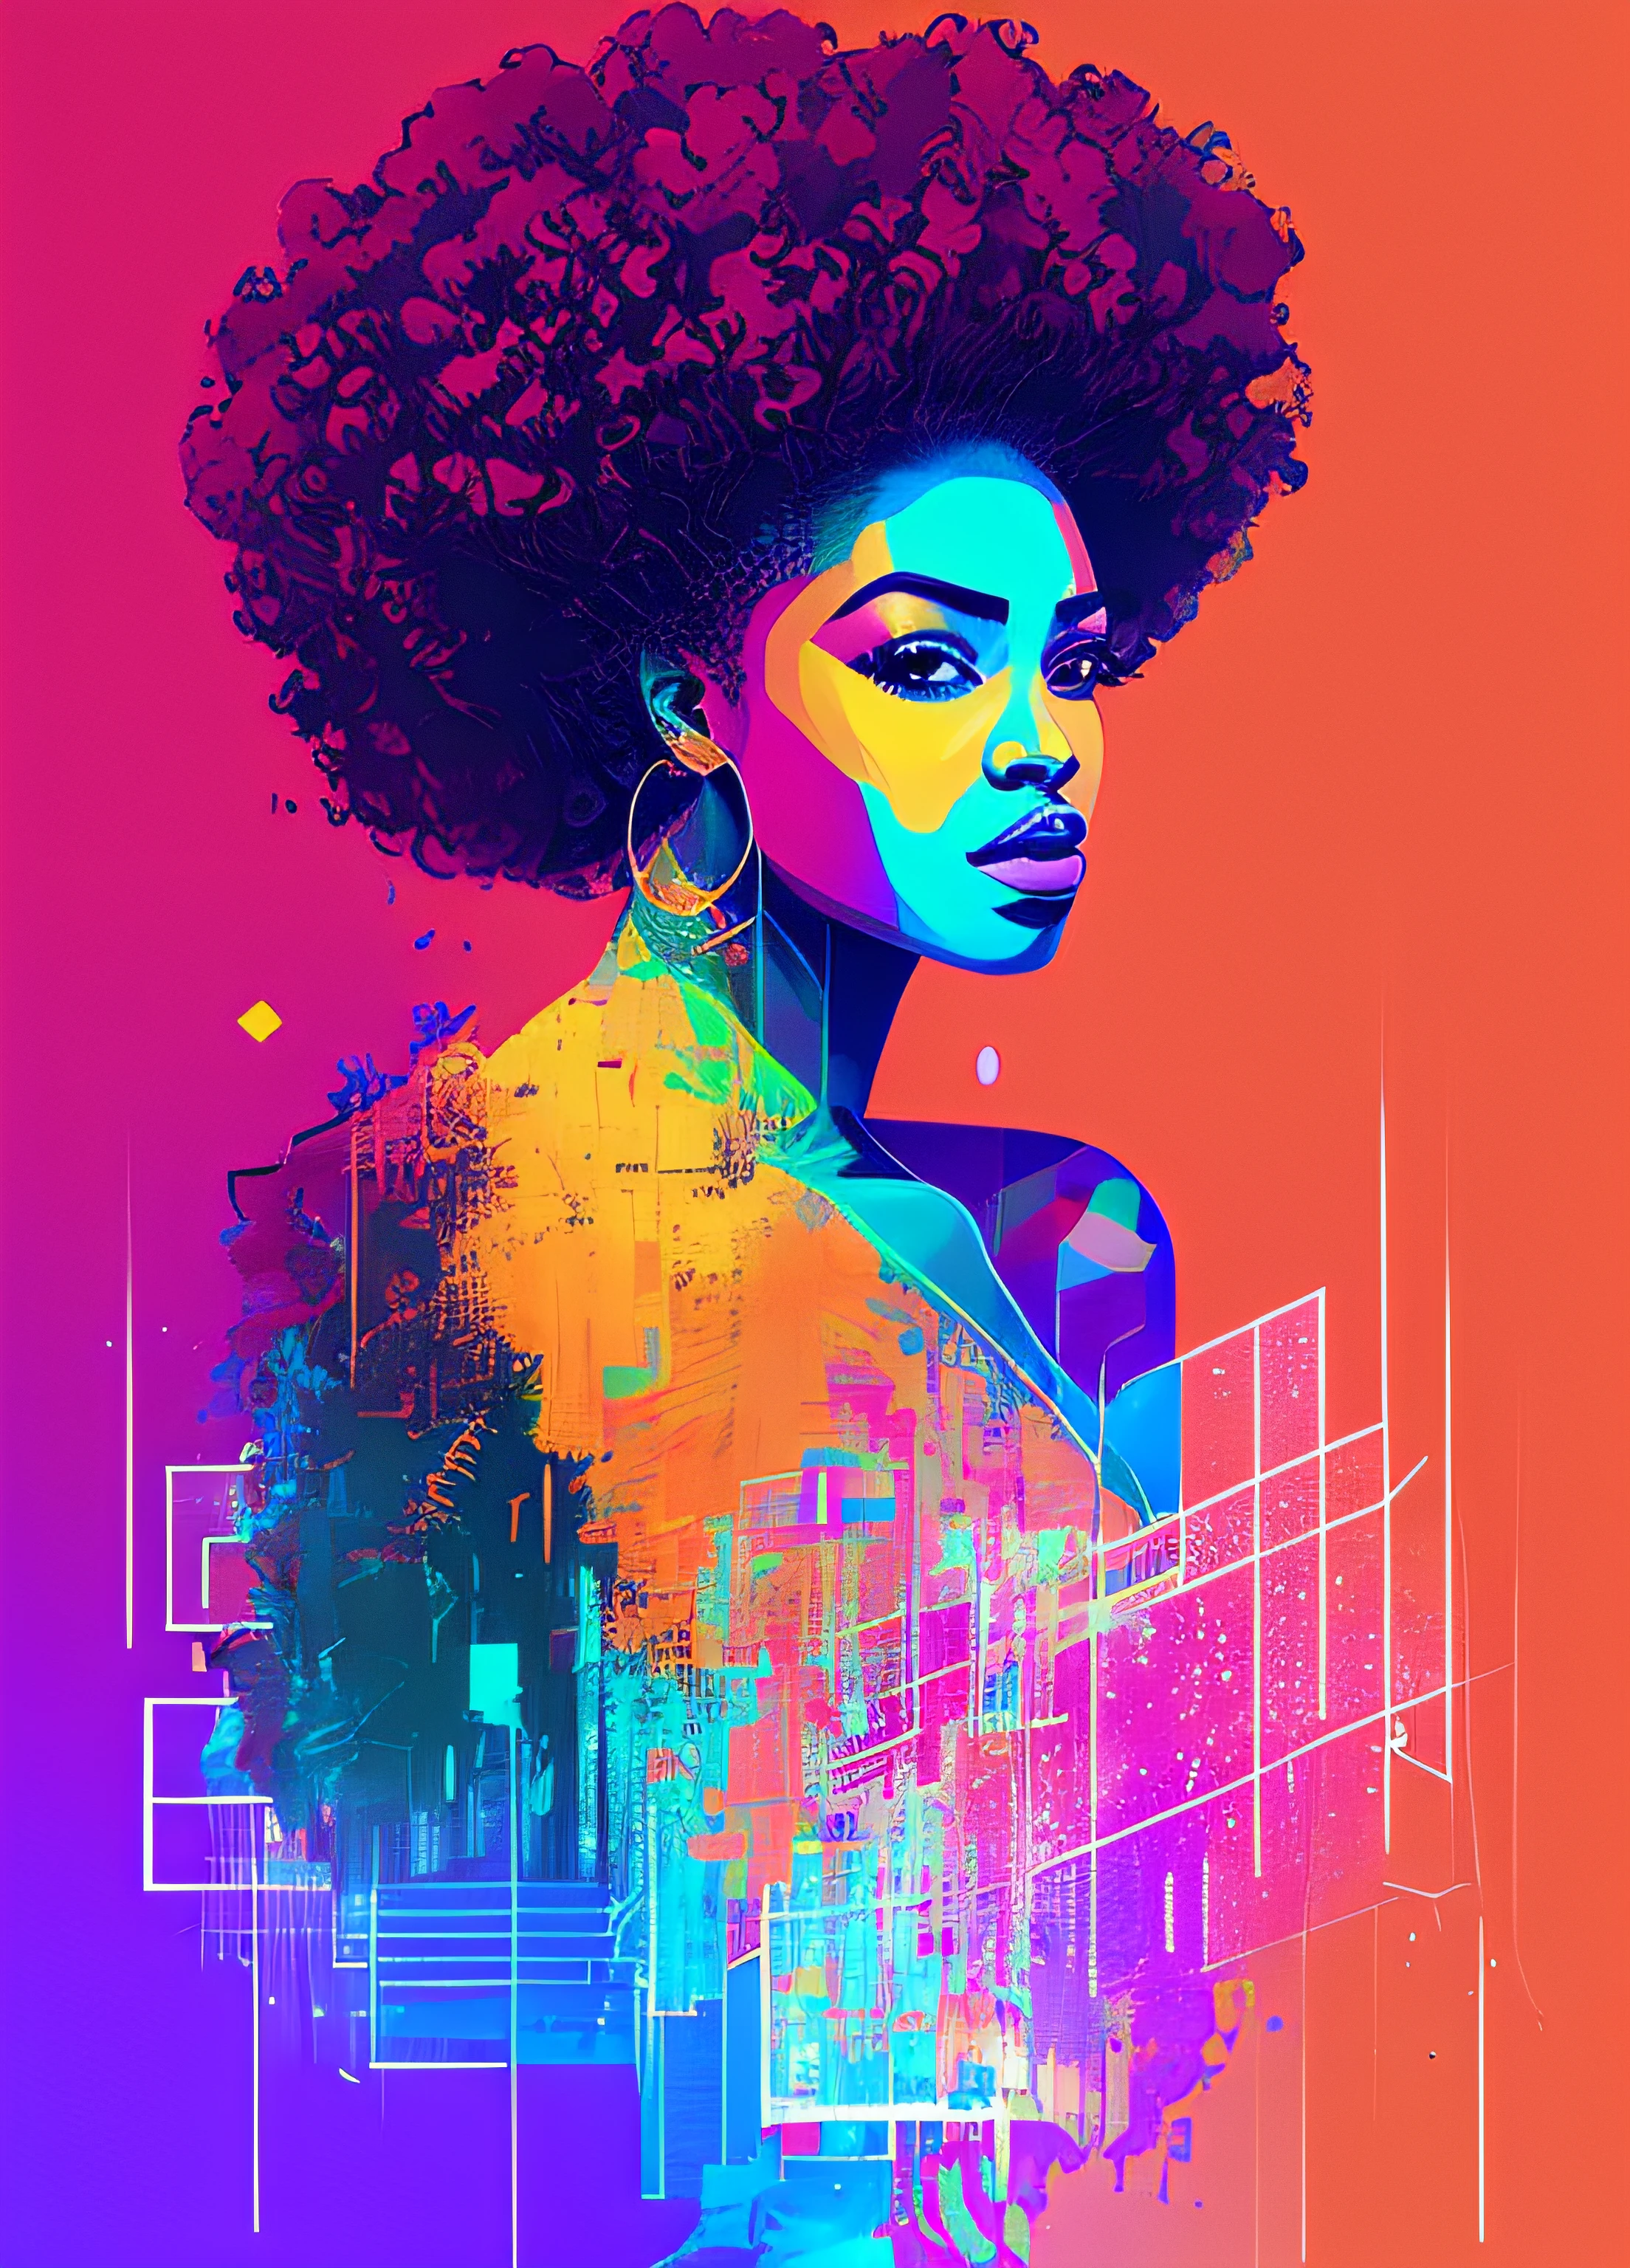 a painting of an afro woman on a geometric background with square and rectangles, Graffiti por Carne Griffiths, Behance, grafity, chromatic, Artwork, cores vibrantes